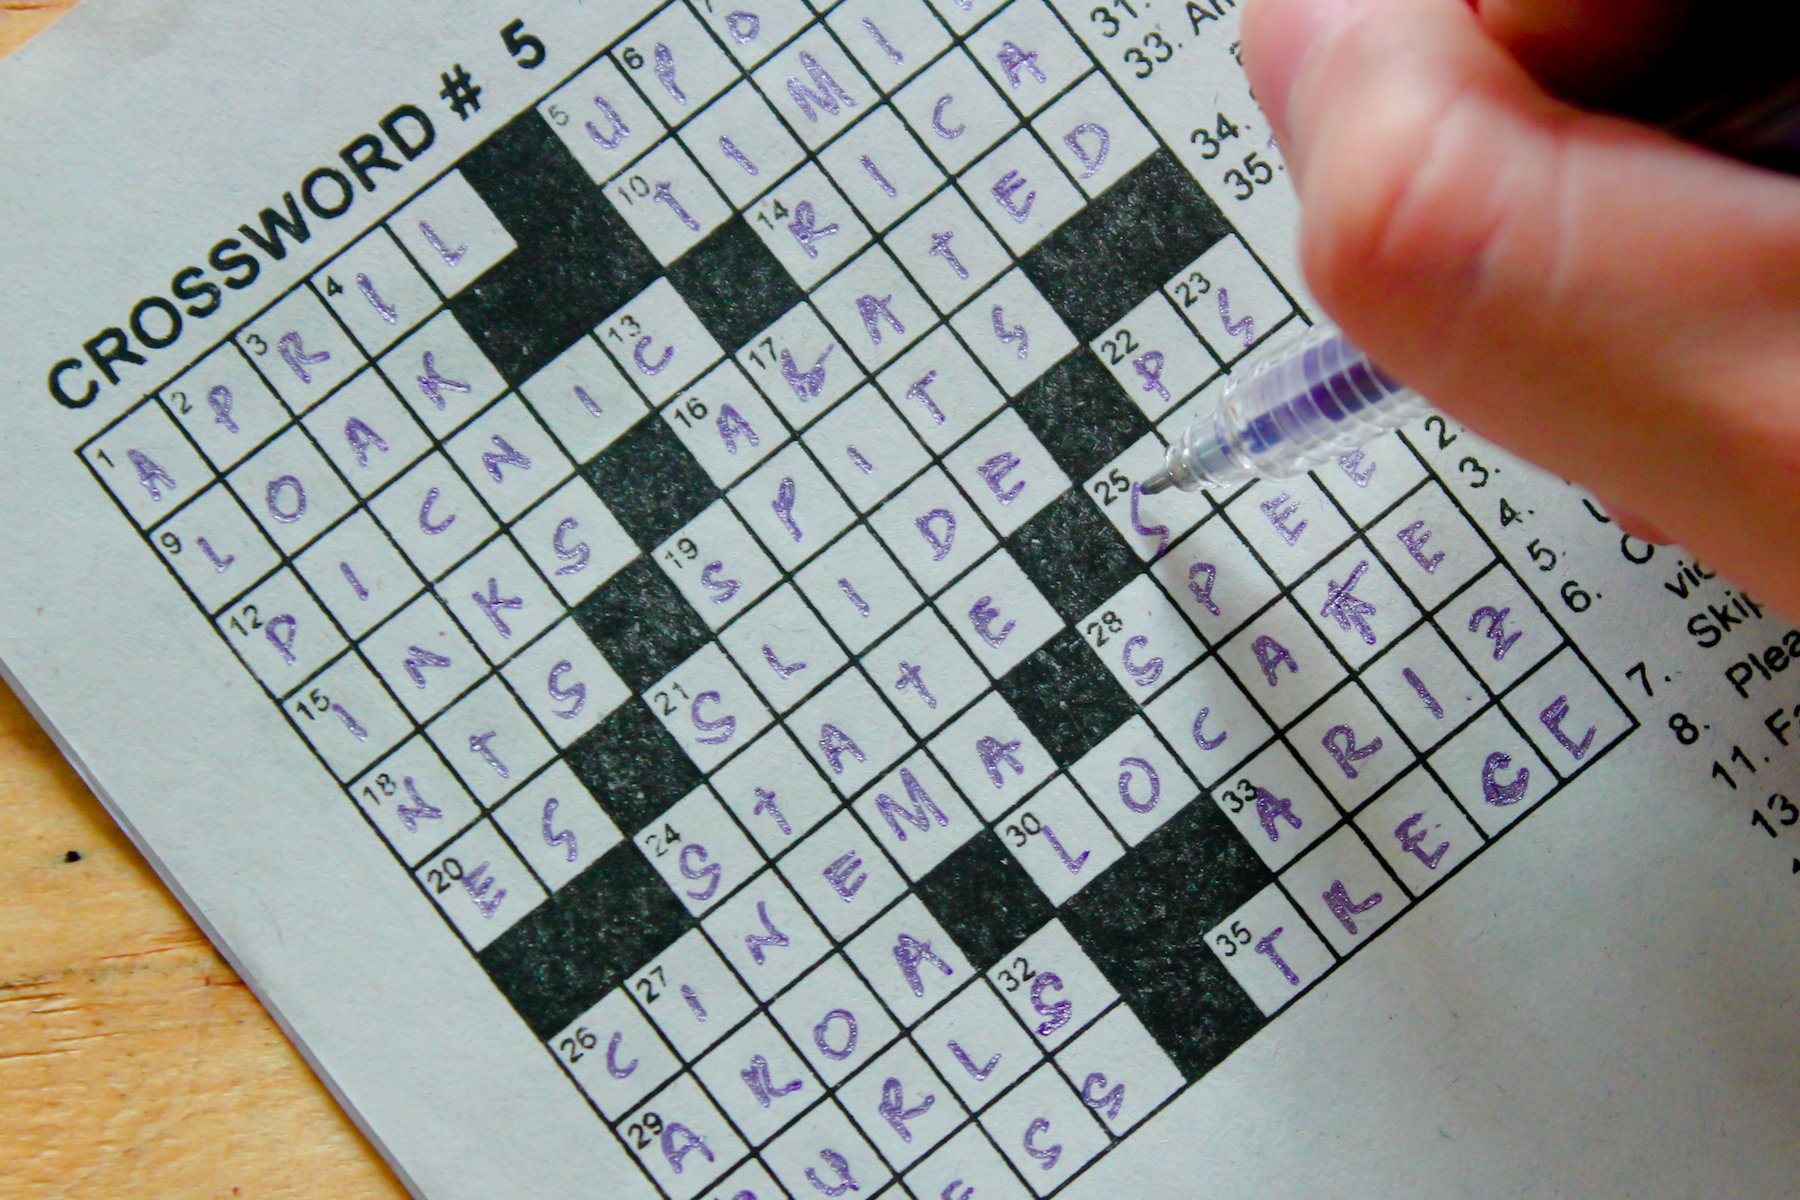 Are people “cheating” on crossword puzzles?